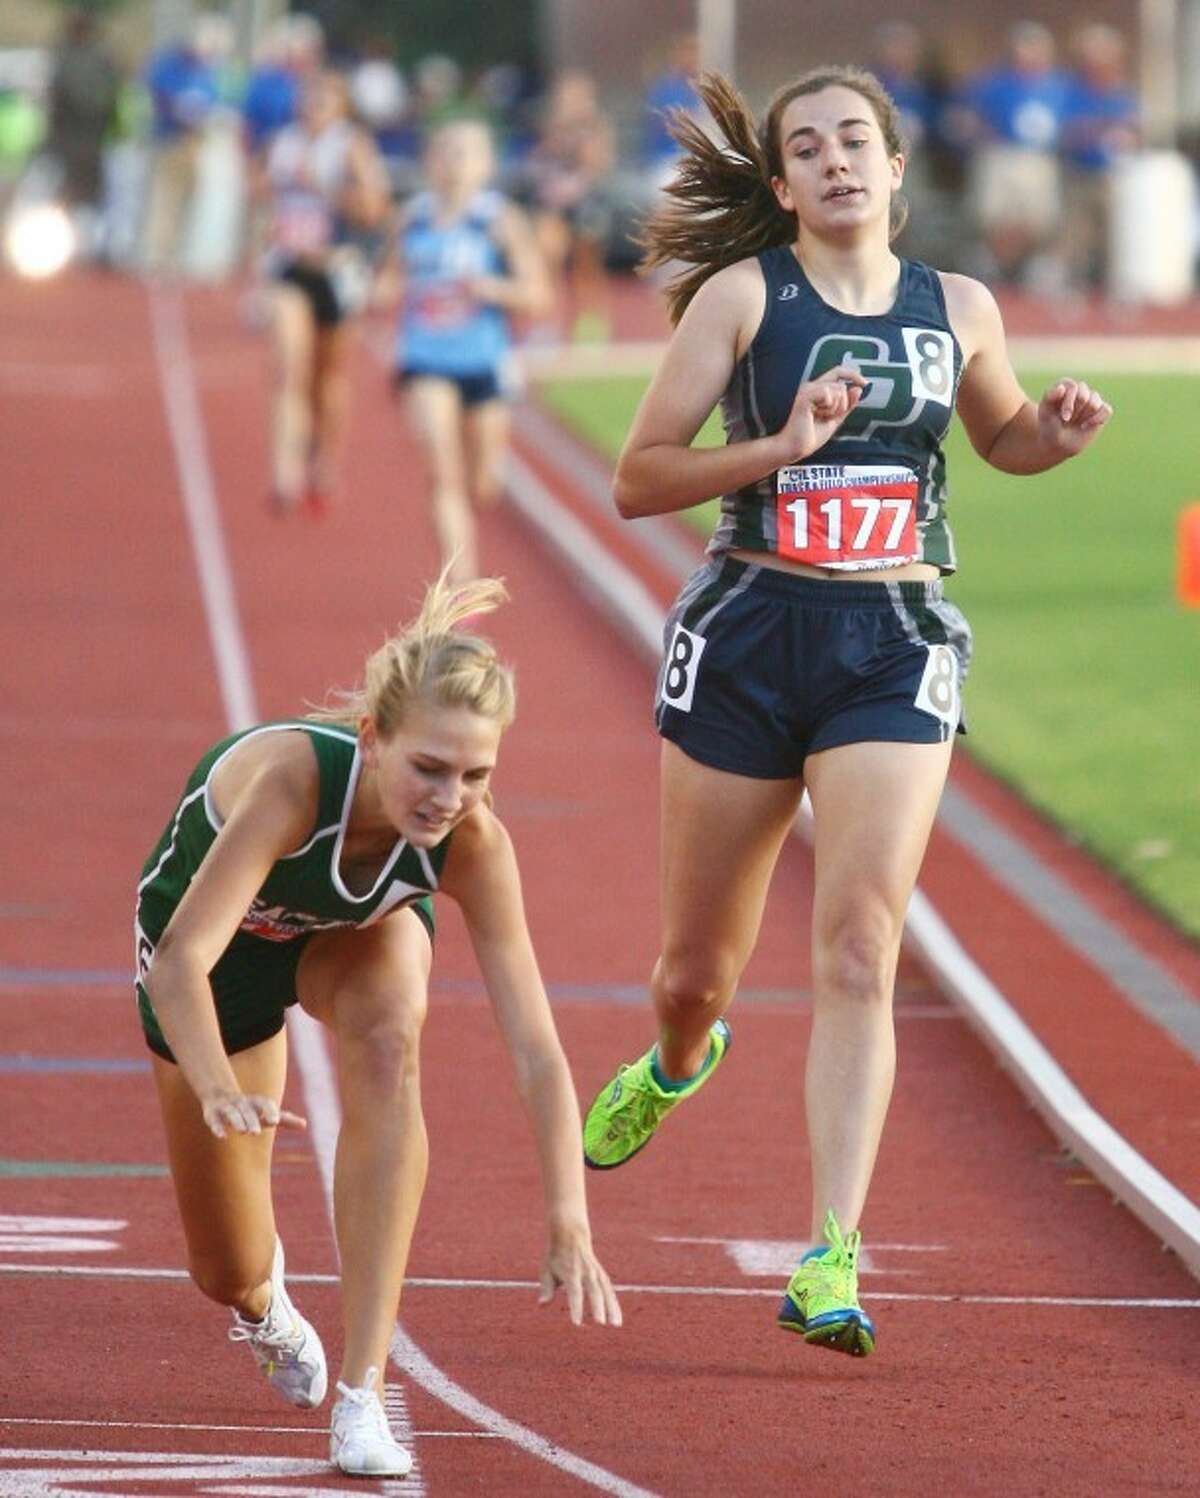 College Park's Katie Jensen won gold in the 3,200-meter run and bronze in the 1,600 at Saturday's Class 5A University Interscholastic League State Track and Field Championships in Austin.